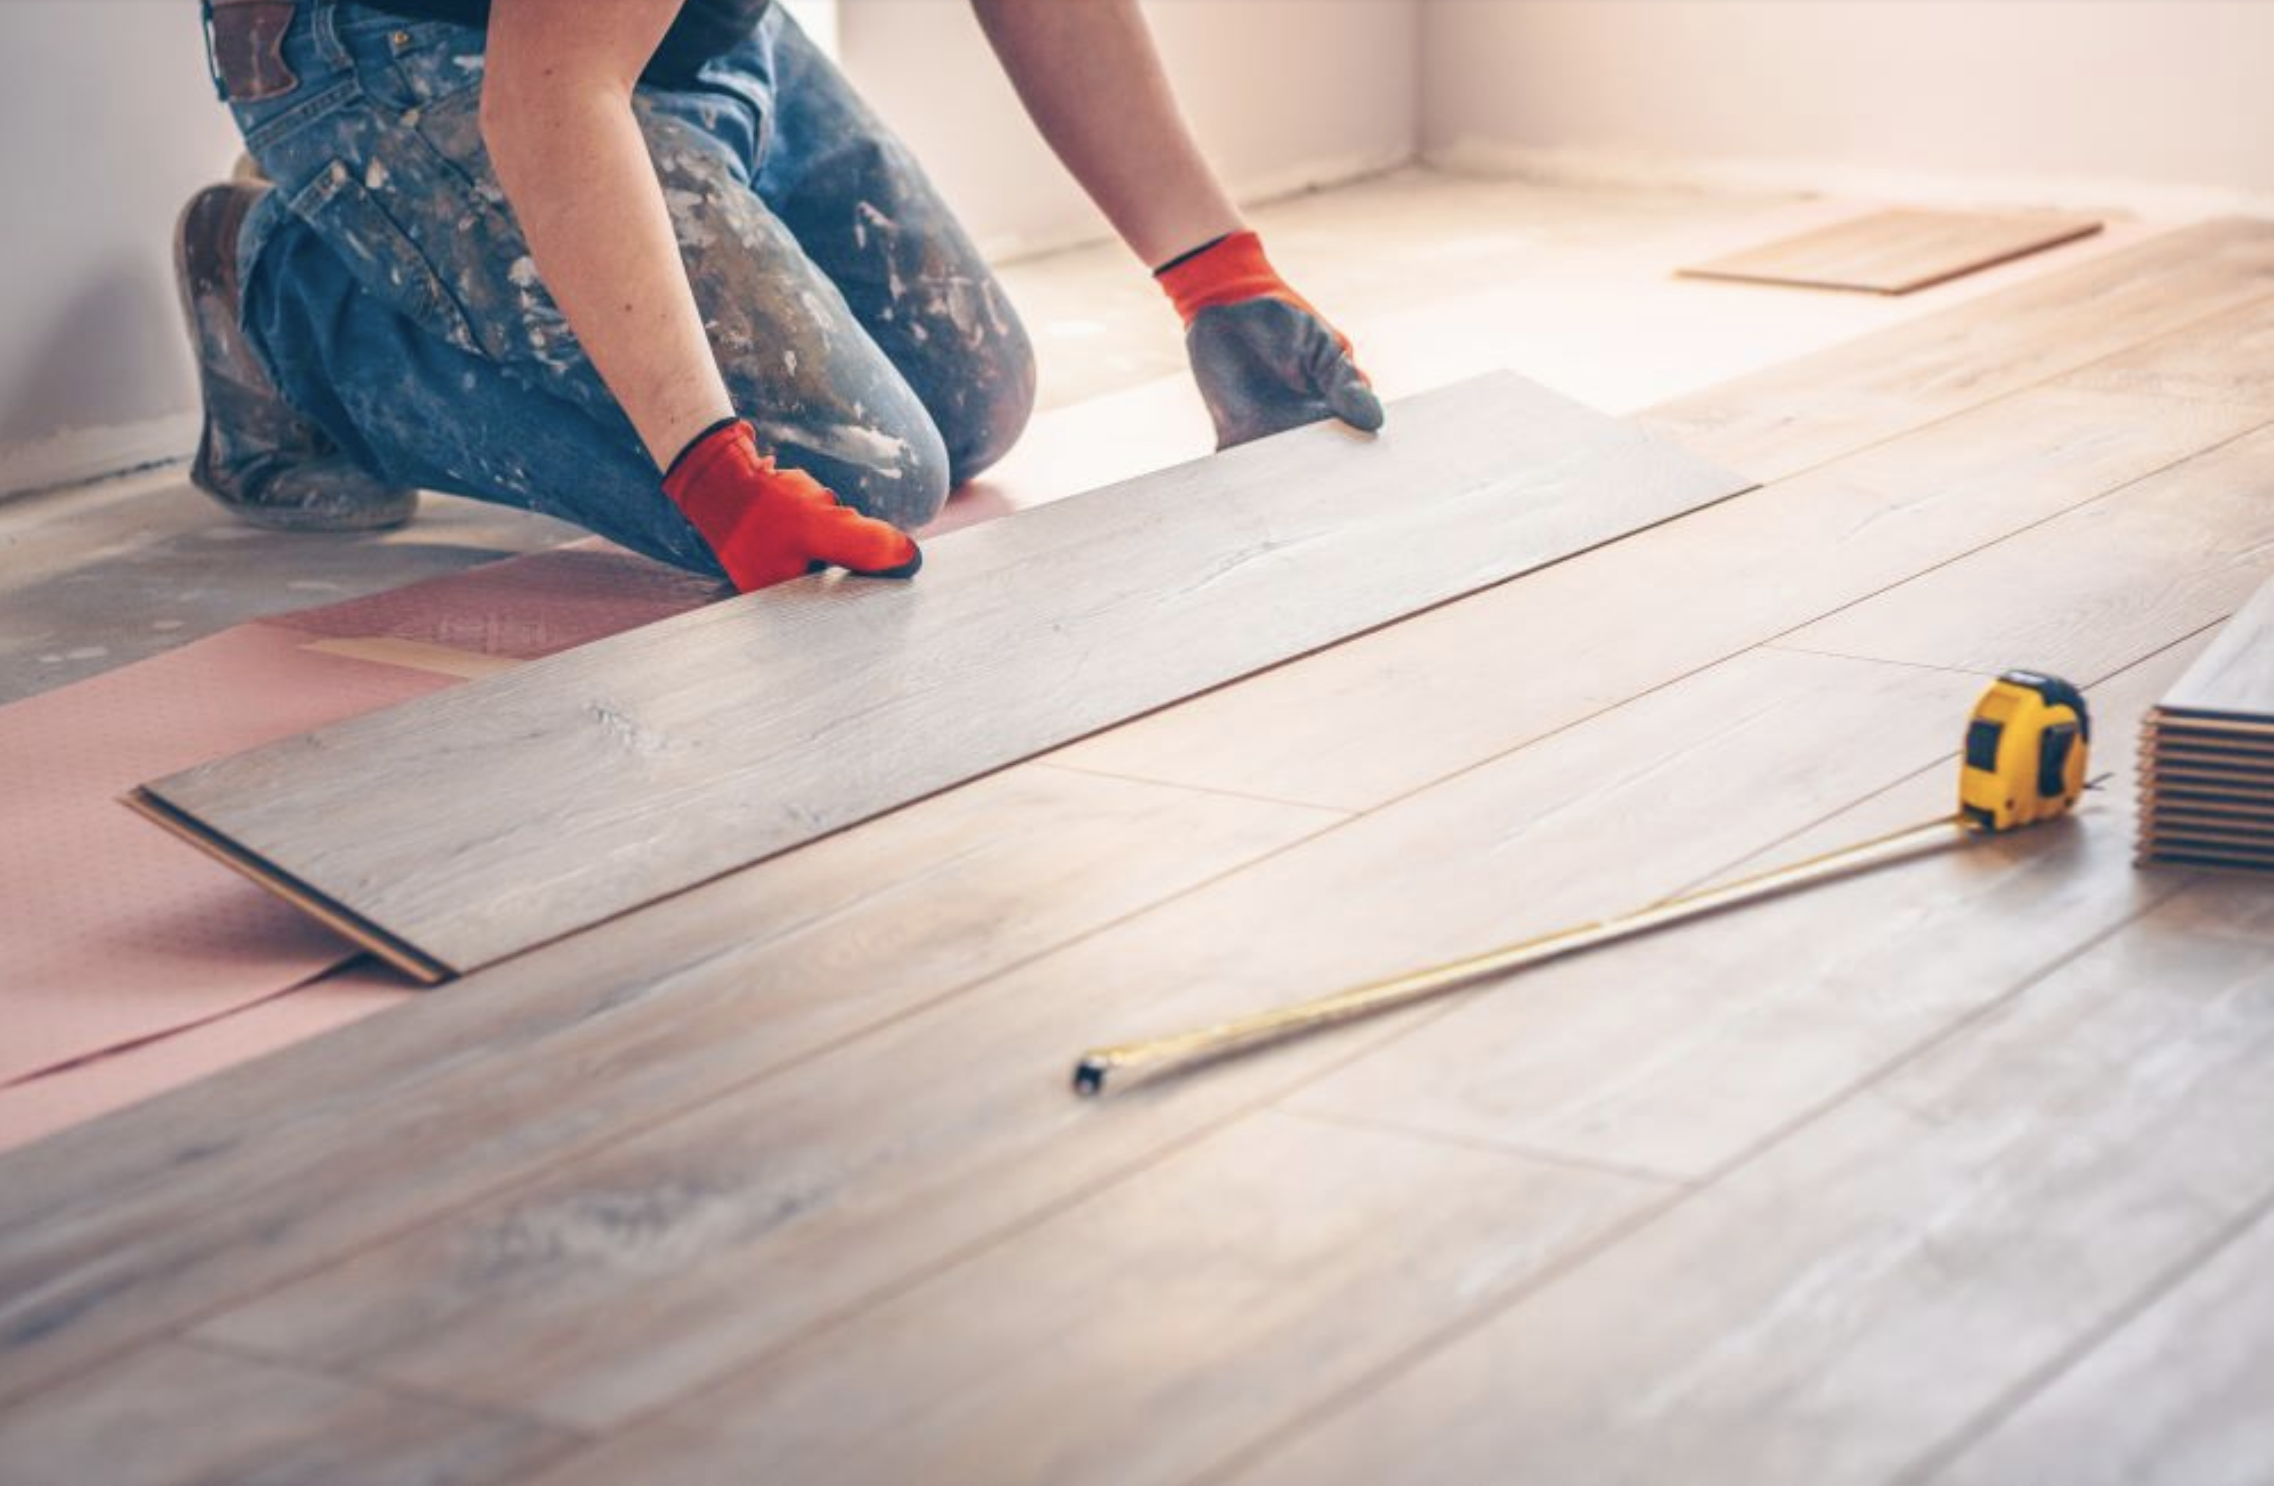 You are currently viewing How to install a hardwood floor during renovations.